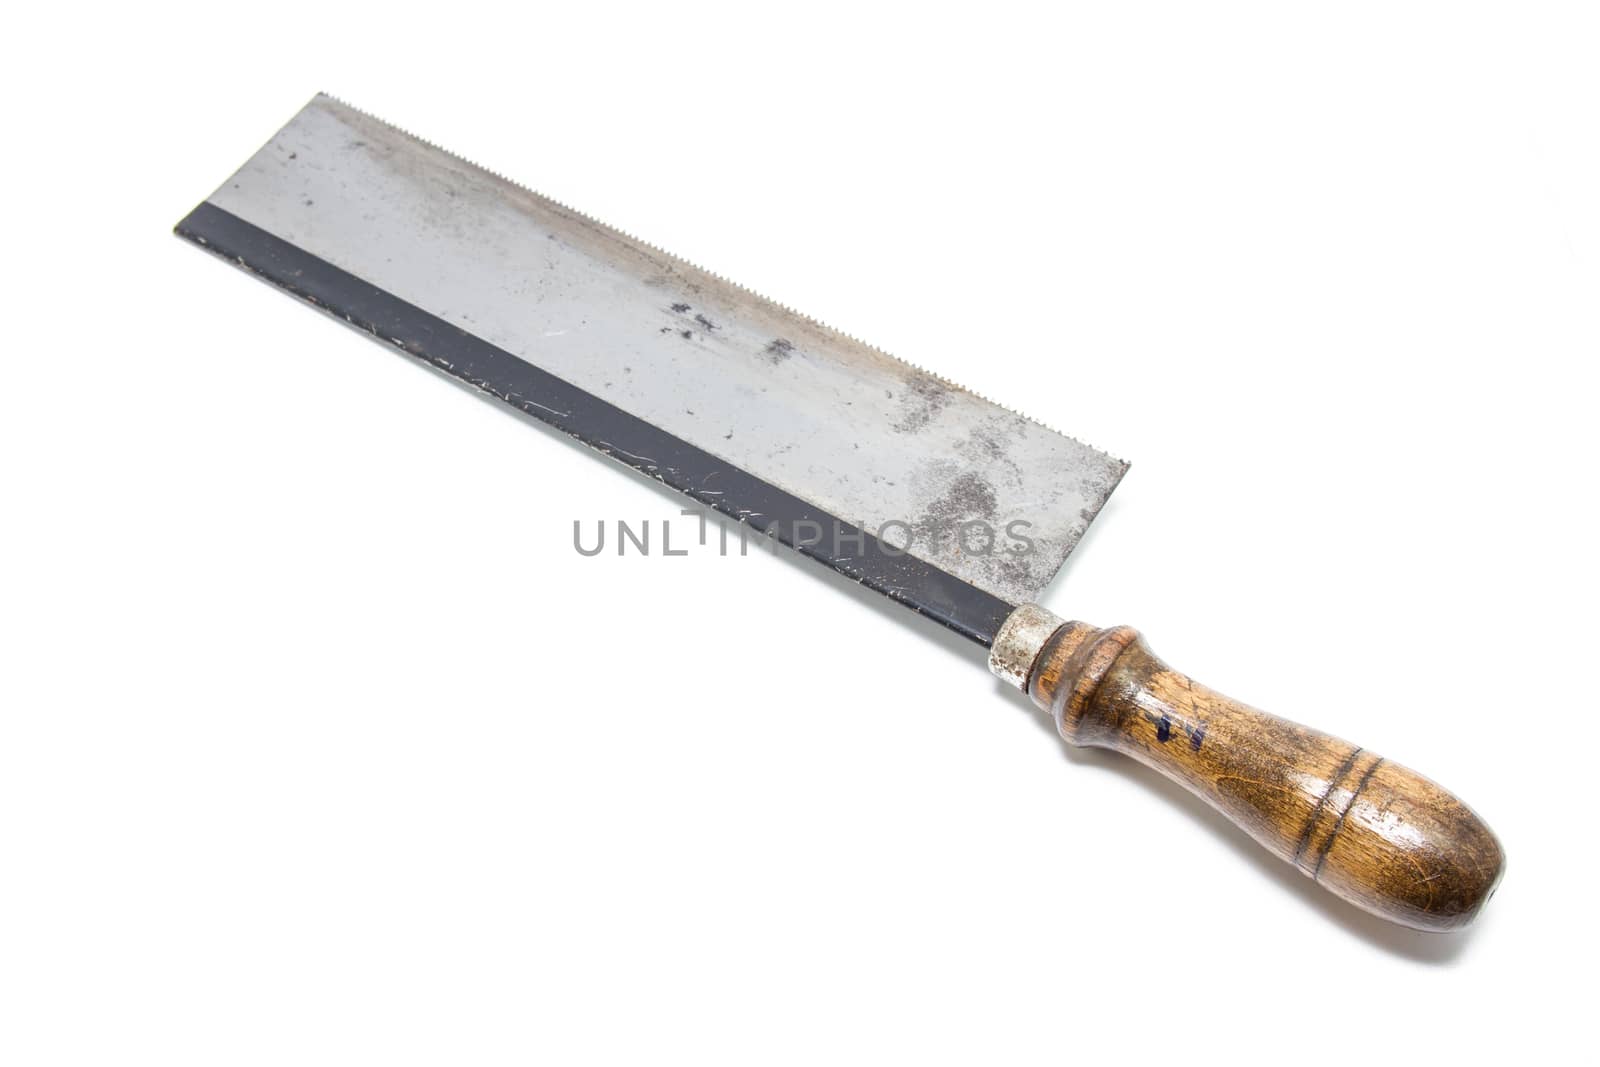 saw with wooden handle isolated on white background